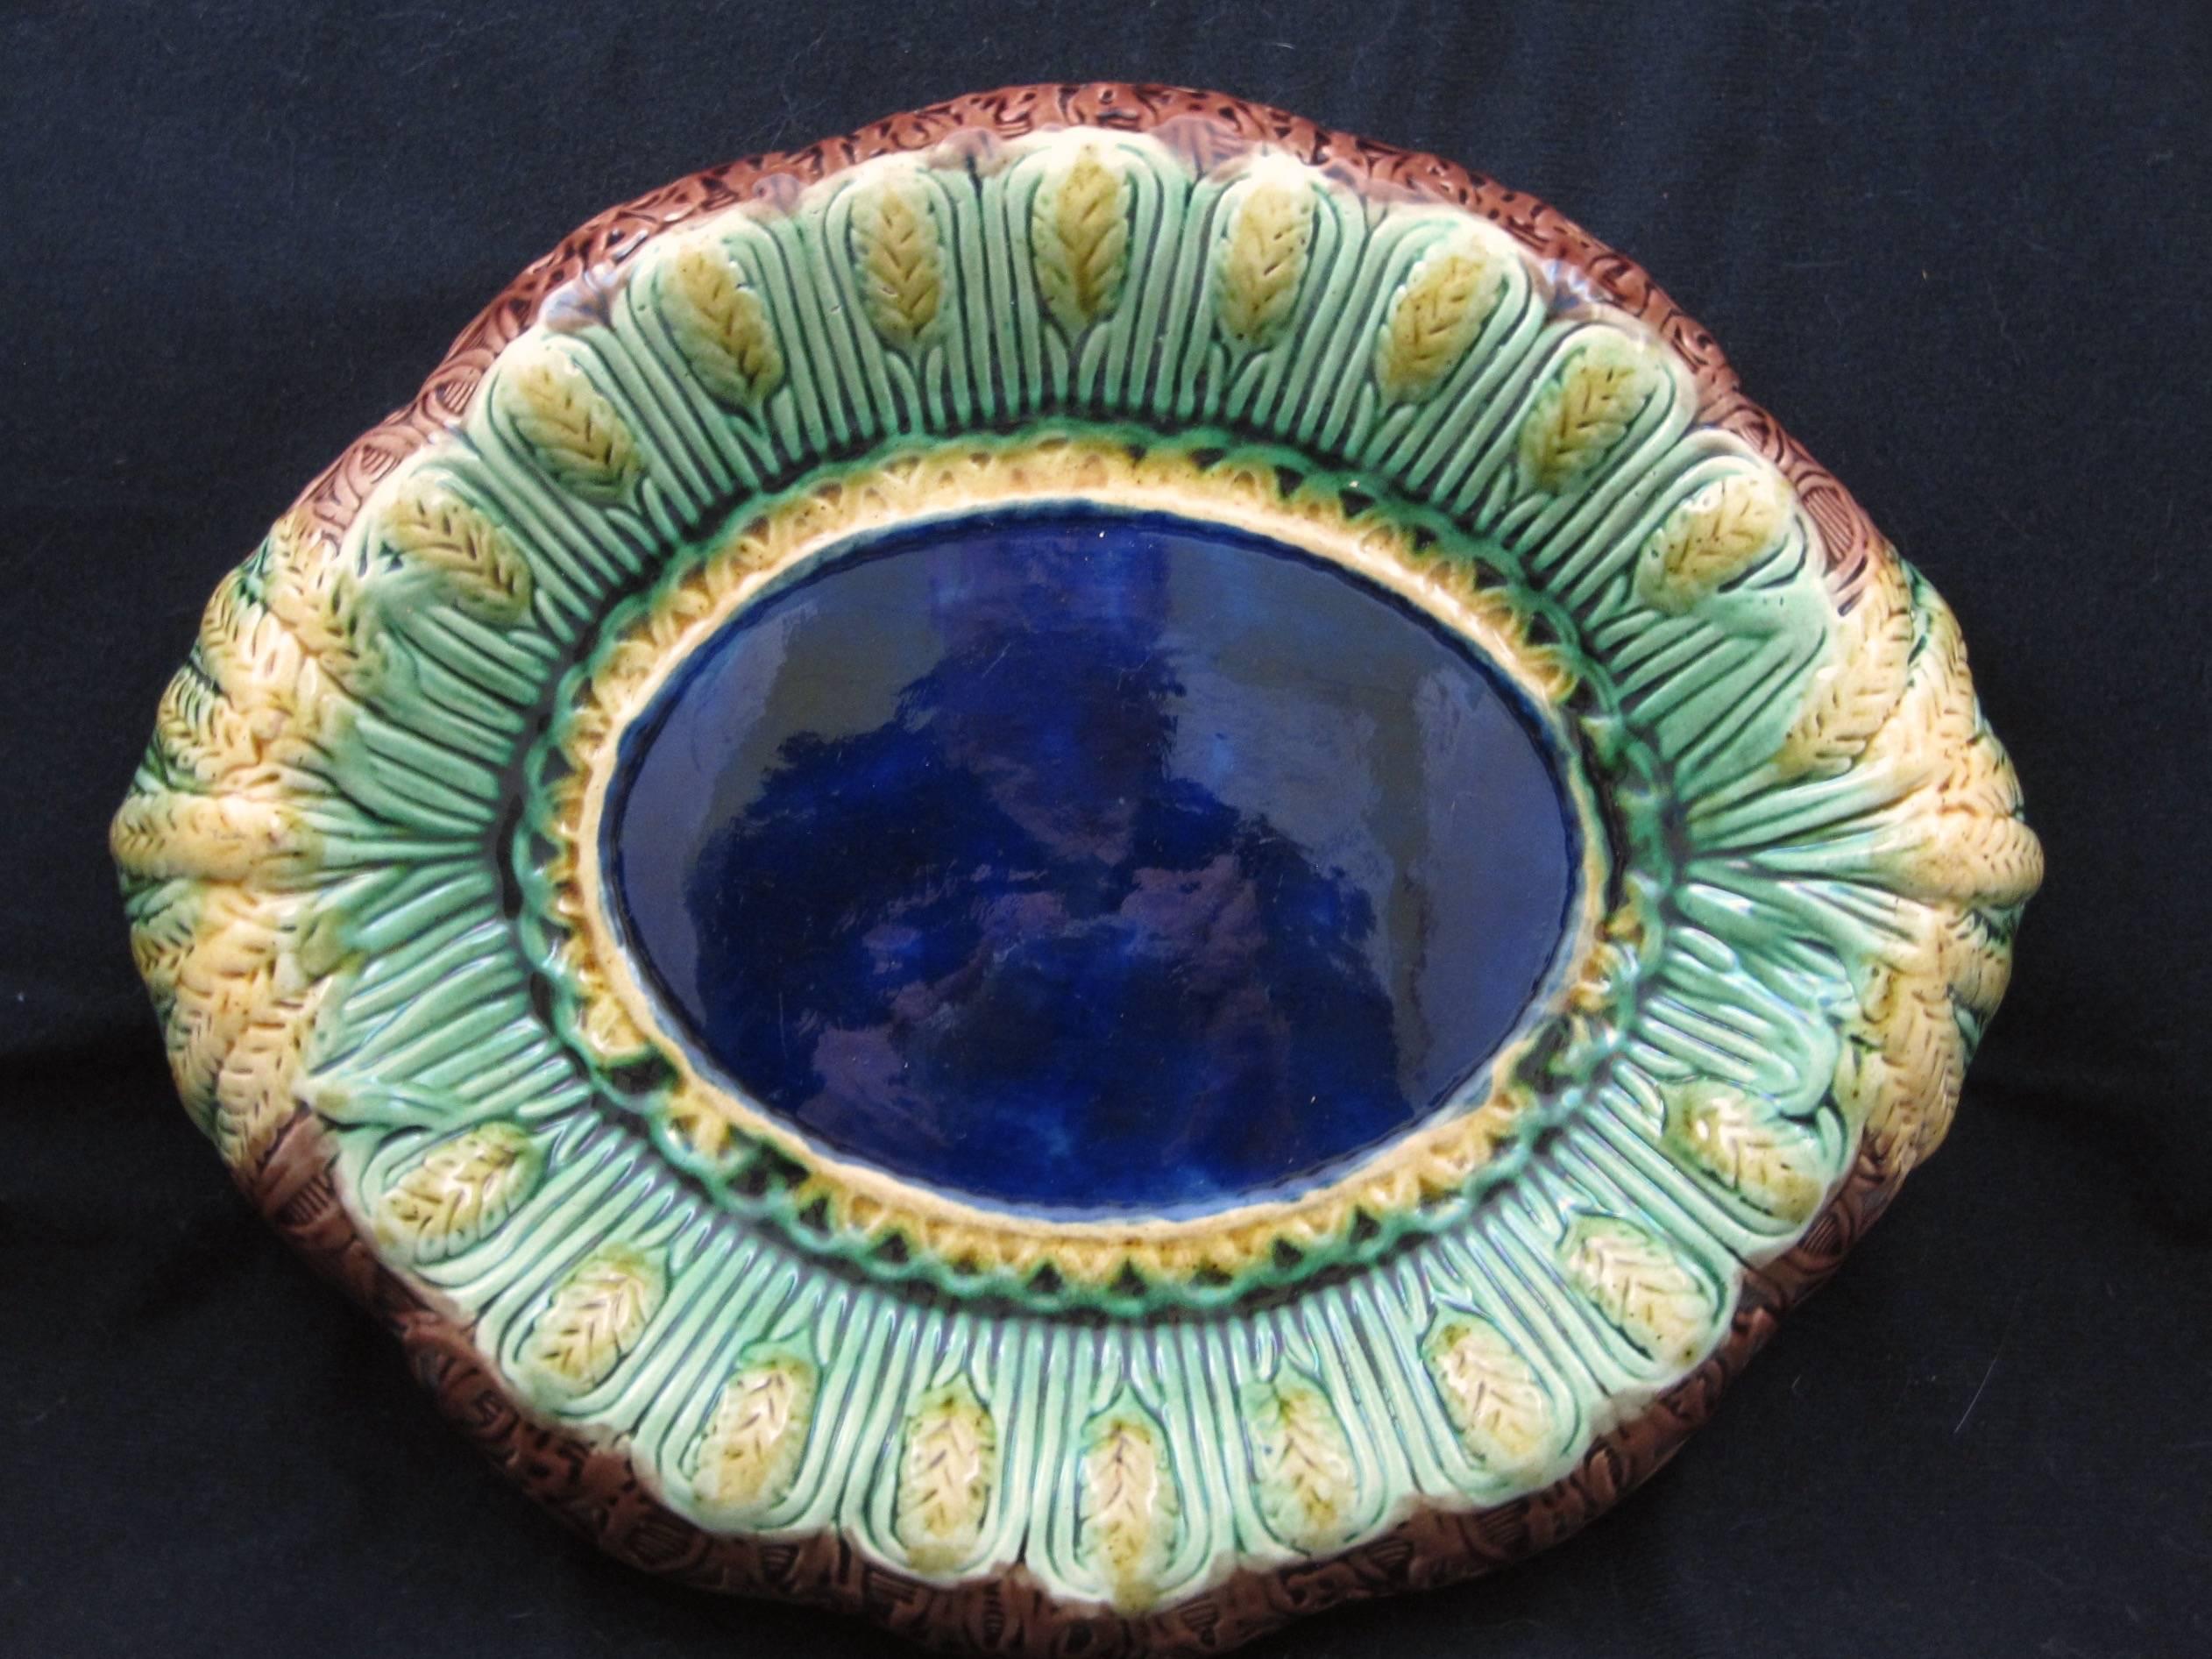 An English Majolica wheat motif bread tray in the Renaissance Revival style, circa 1880-1885. 

A heavy and dimensional platter showing a running border of wheat heads encircling a deep cobalt blue center ringed with a basket weave. Gathered wheat